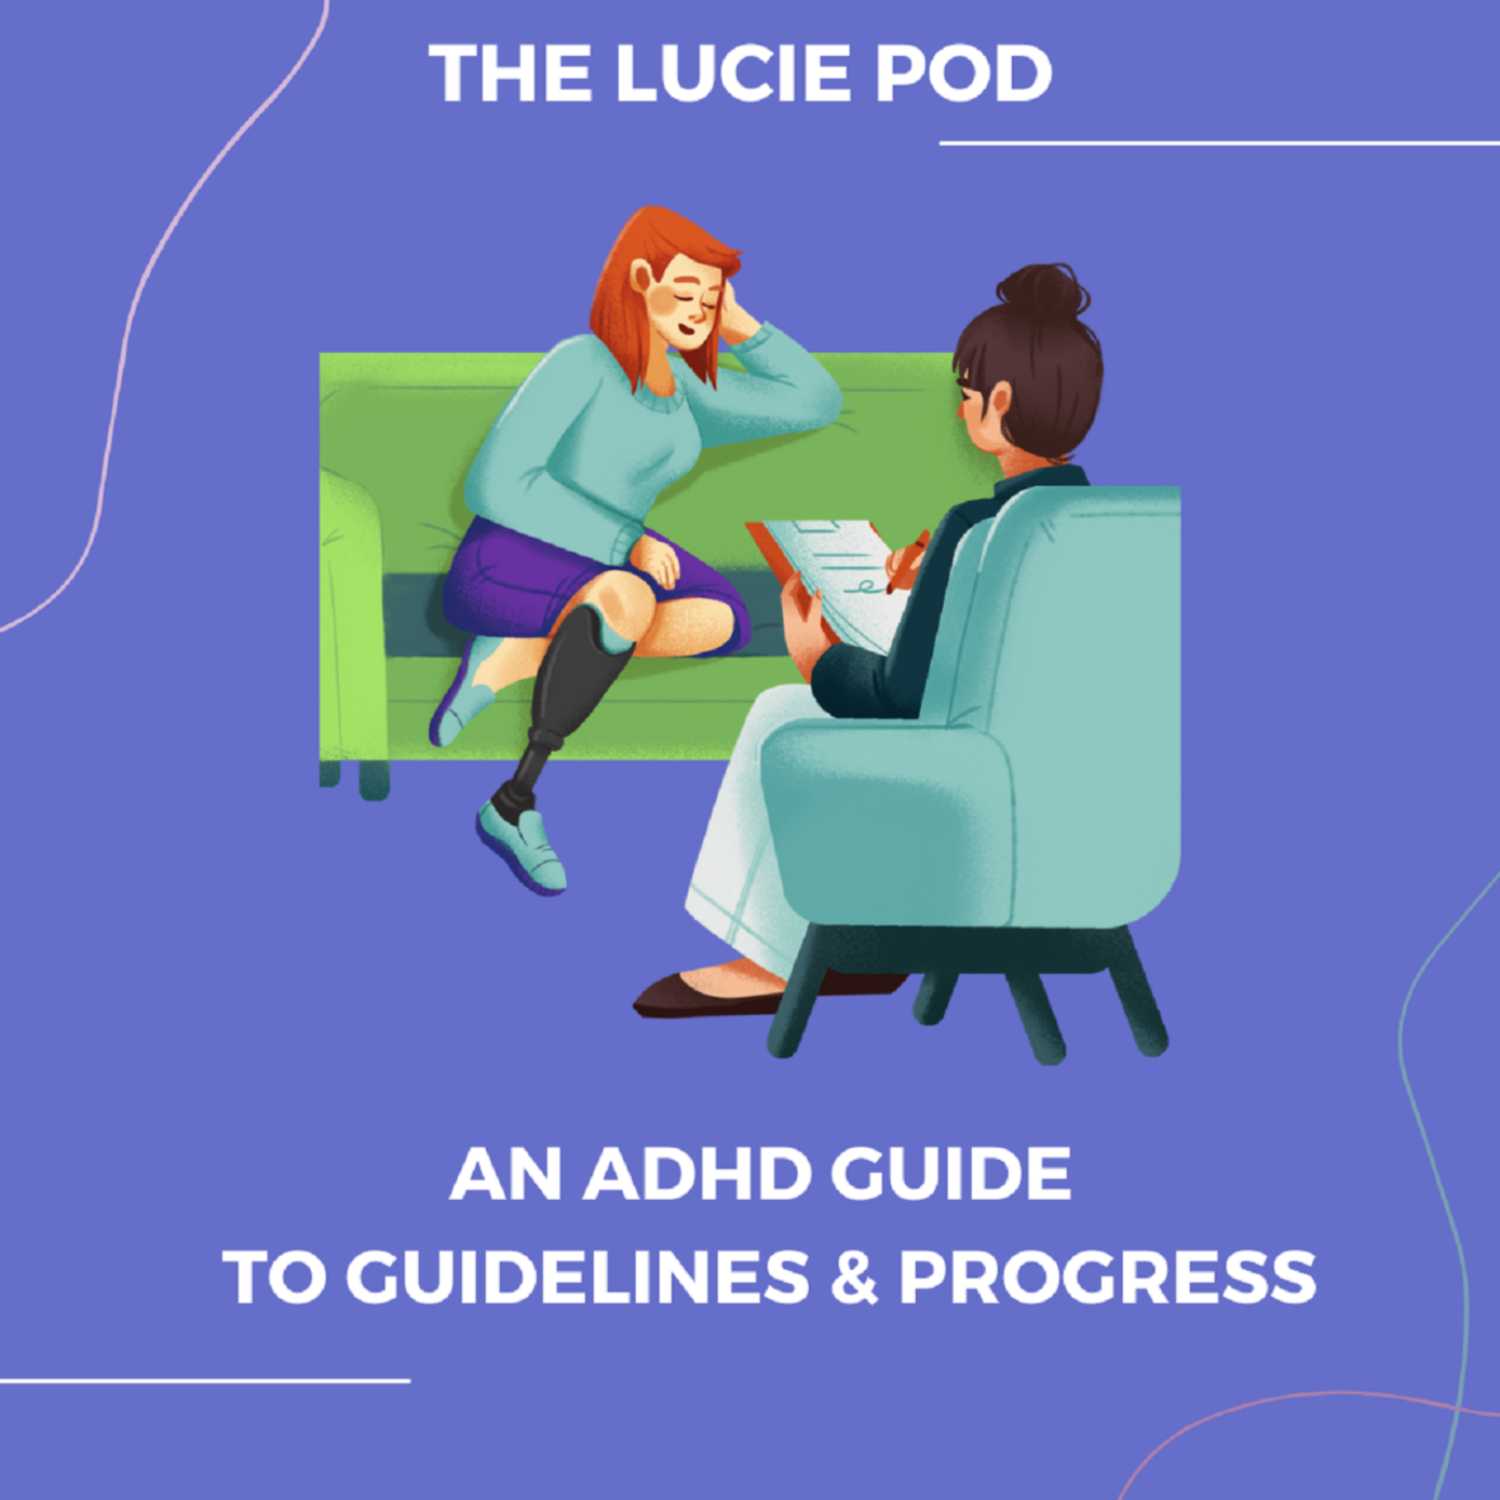 An ADHD Guide to guidelines & progress